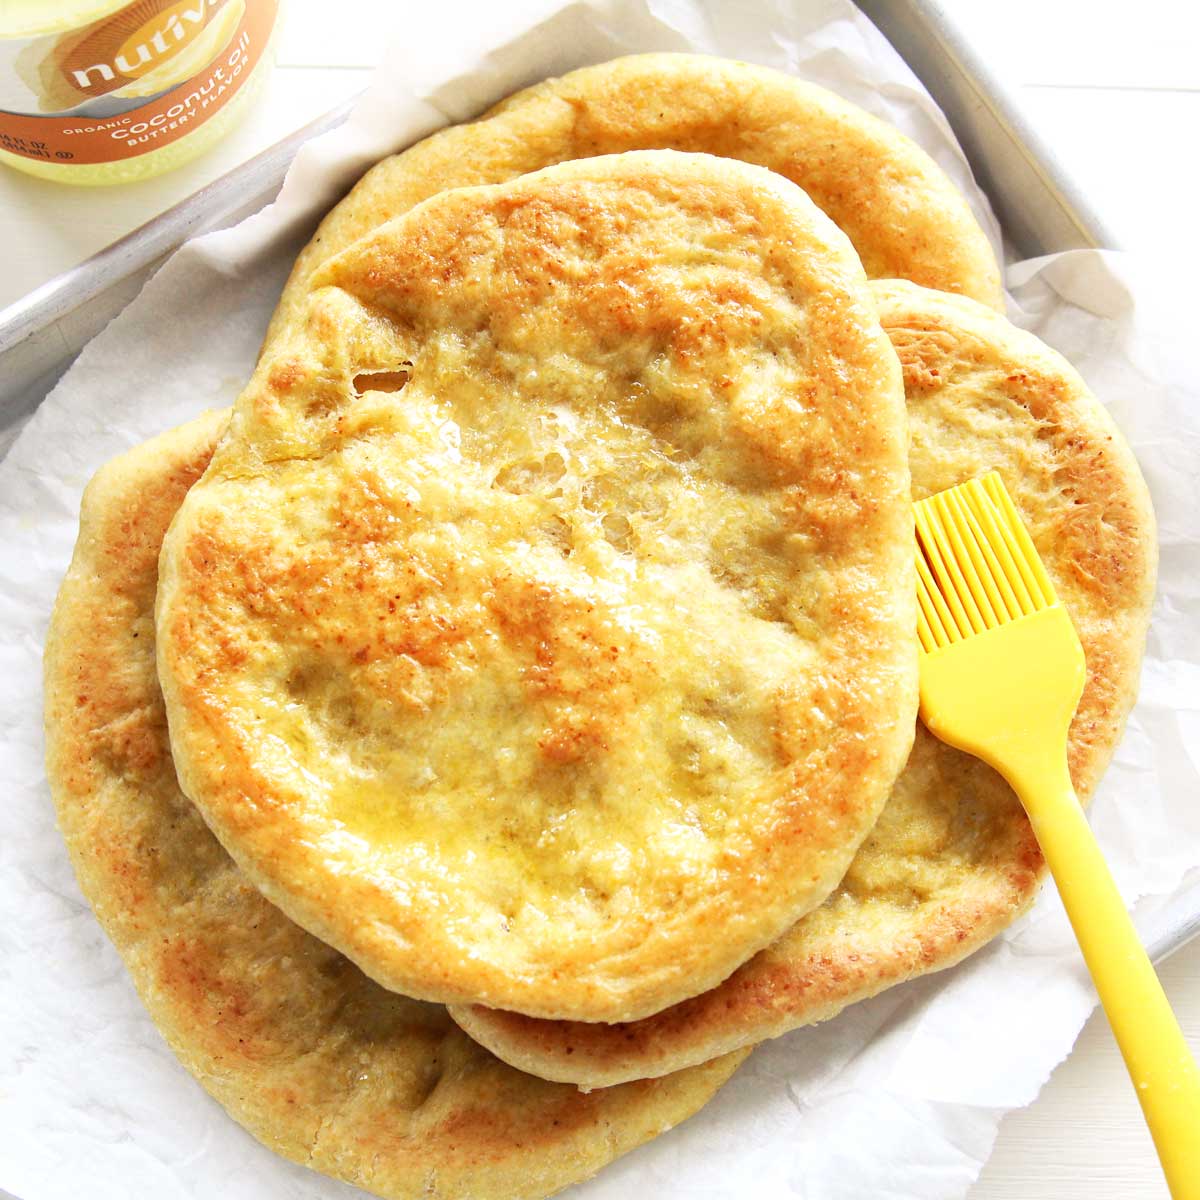 The Best Fire Roasted Corn Naan Made in the Food Processor - Sweet Corn Flatbread